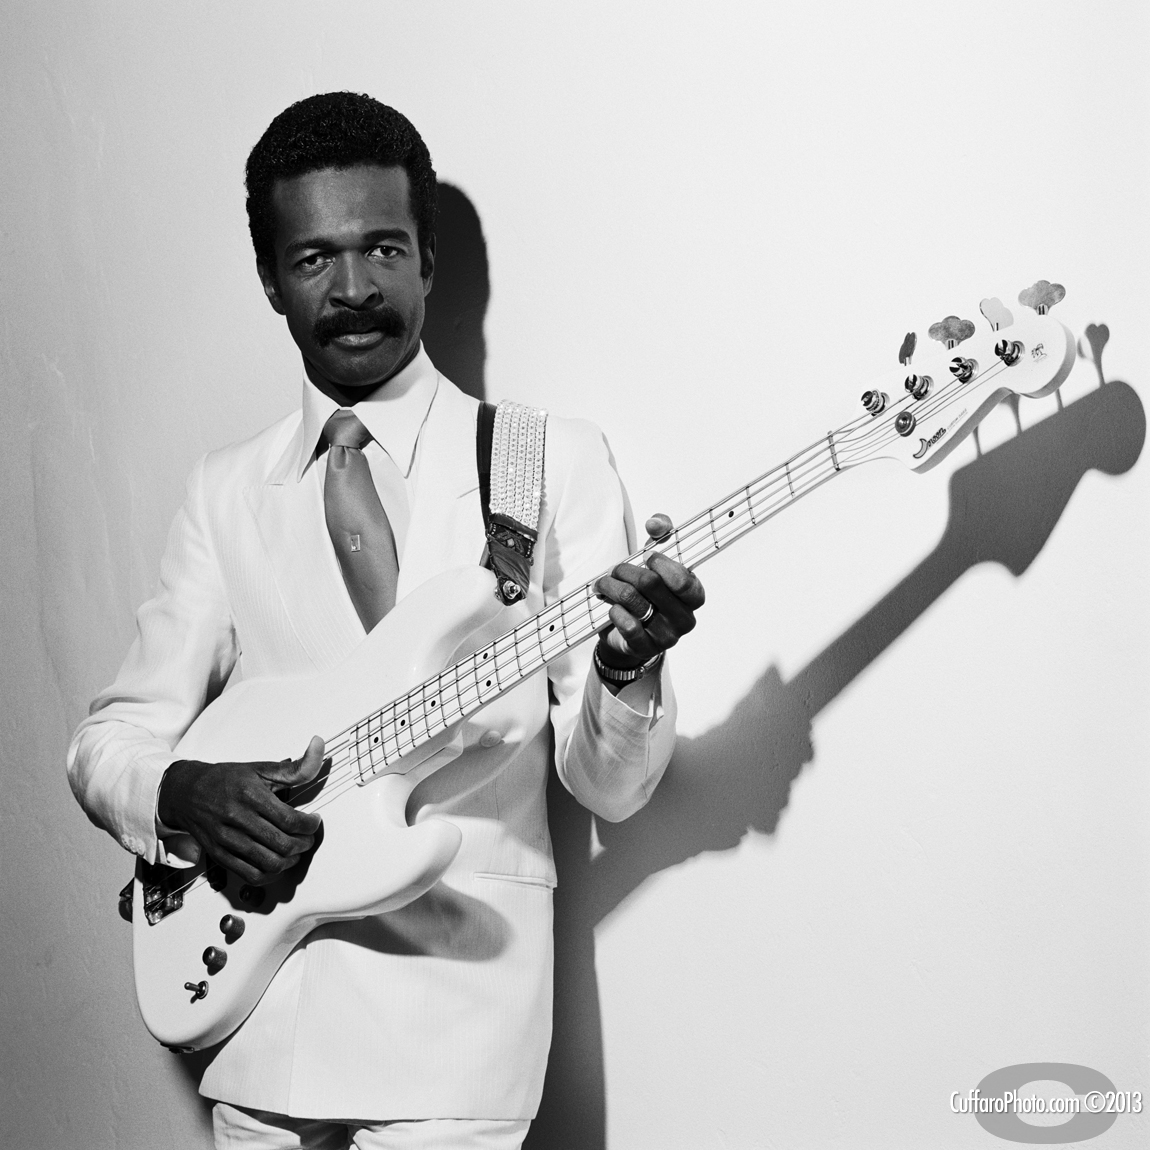 Larry Graham August 14 1946 American Bassist Guitarist Singer Songwriter And Producer O A Known From The Band S The Family Stone Funk Music Black Music